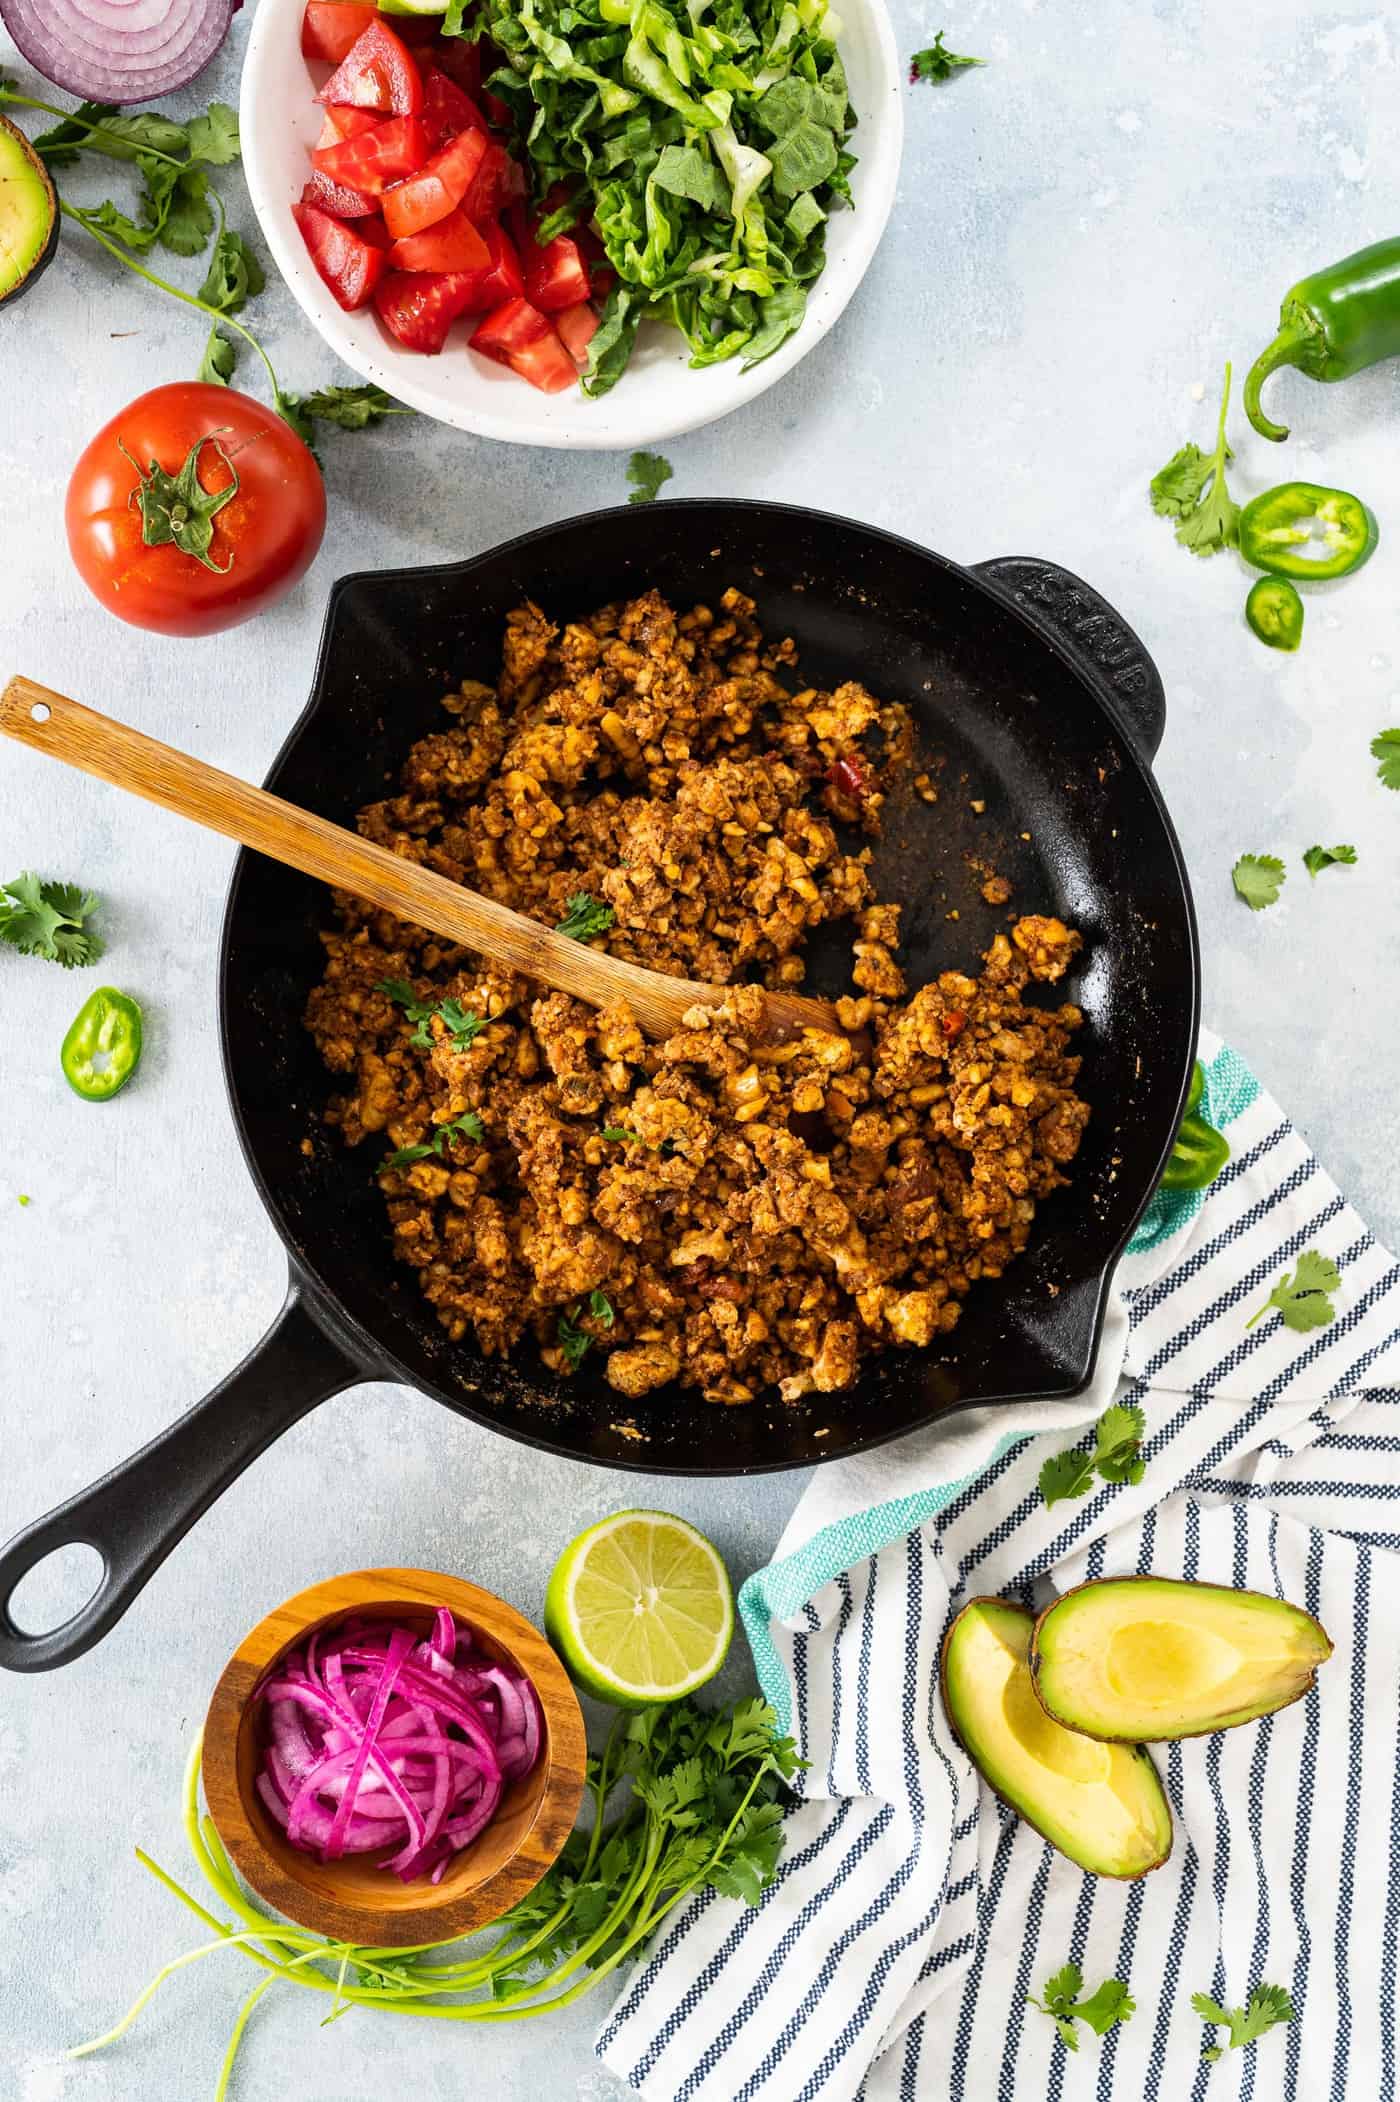 Vegan Taco Salad Bowls with Tempeh Walnut Taco Meat recipe via The Pig & Quill #plantbased #grainfree